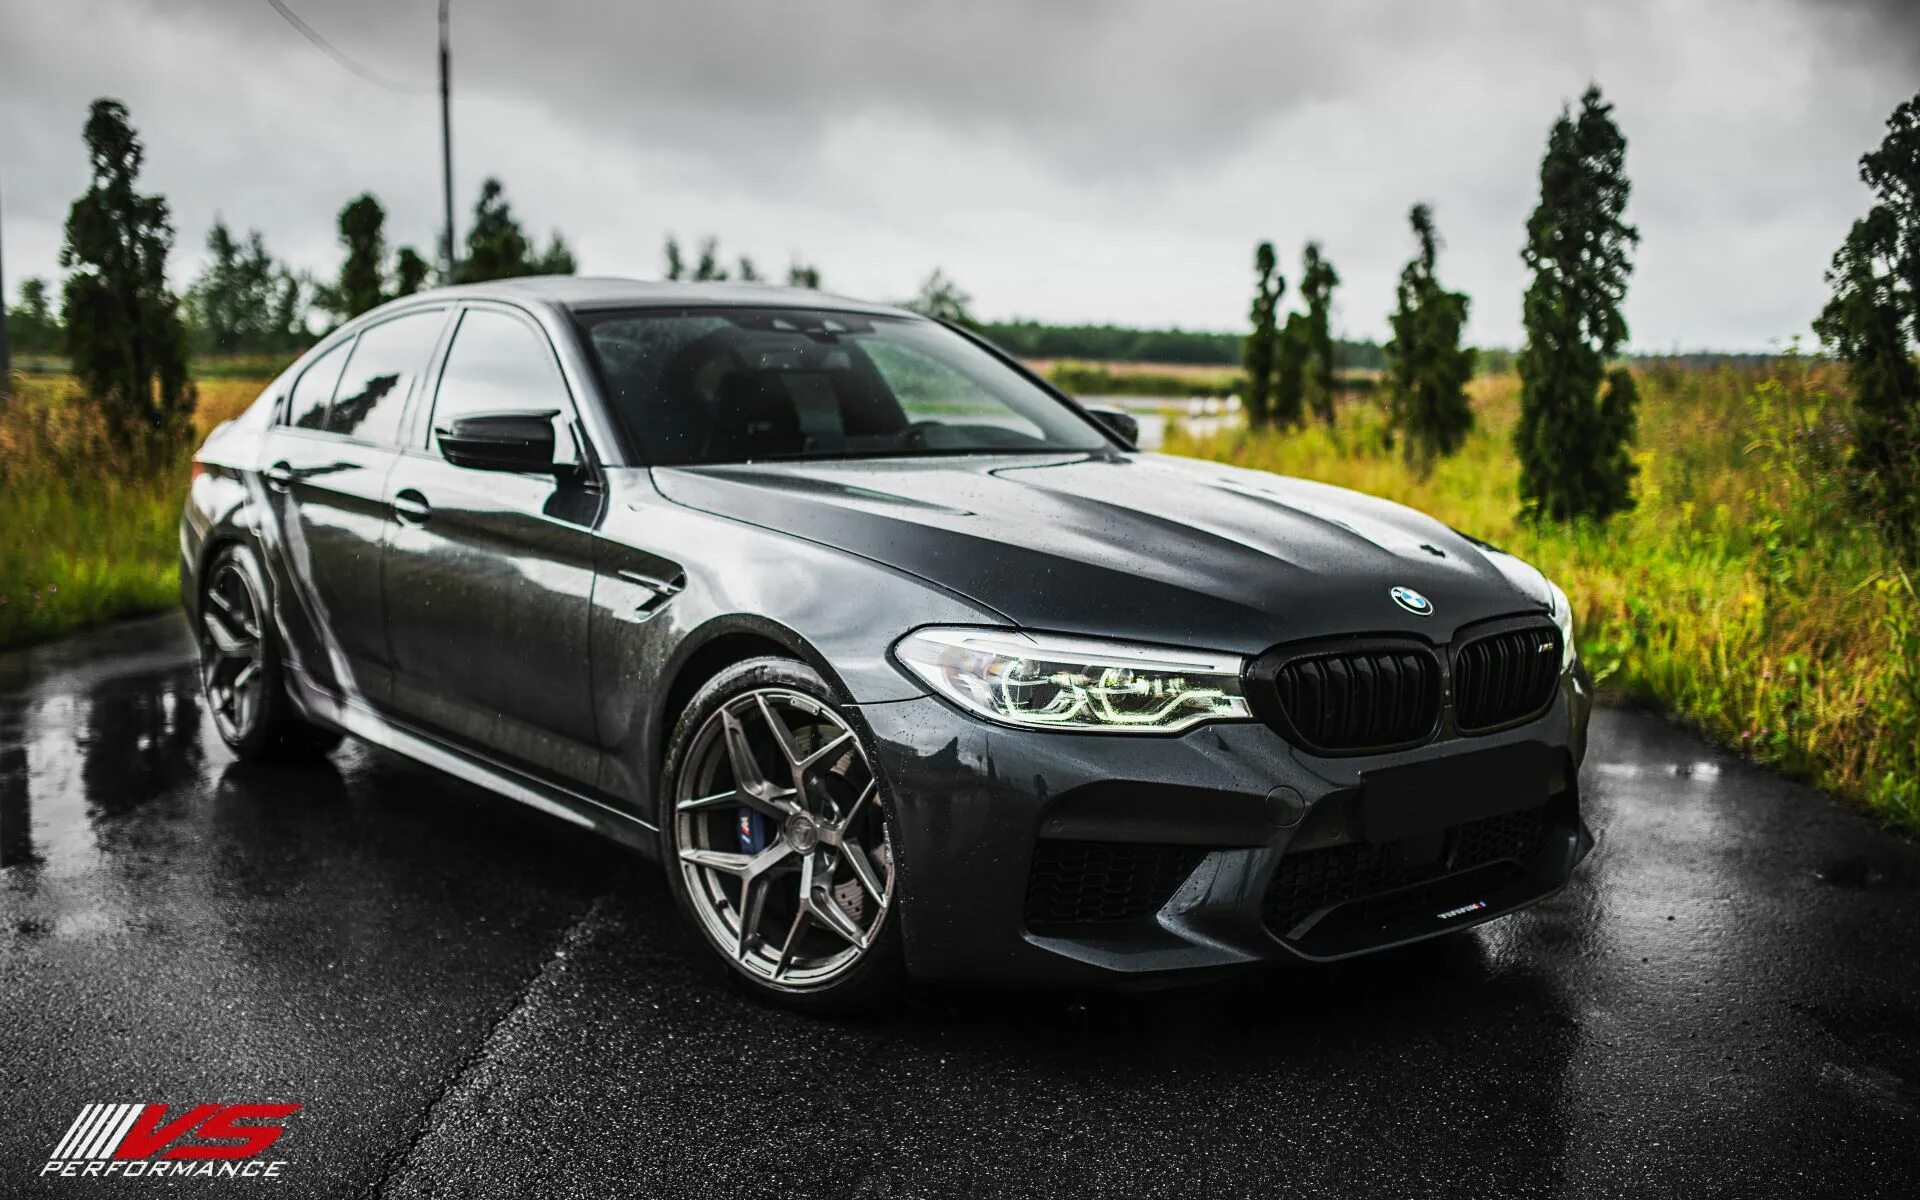 BMW m5 f90. БМВ м5 ф90 черная. M5 f90. BMW m5 f90 Stage 2.